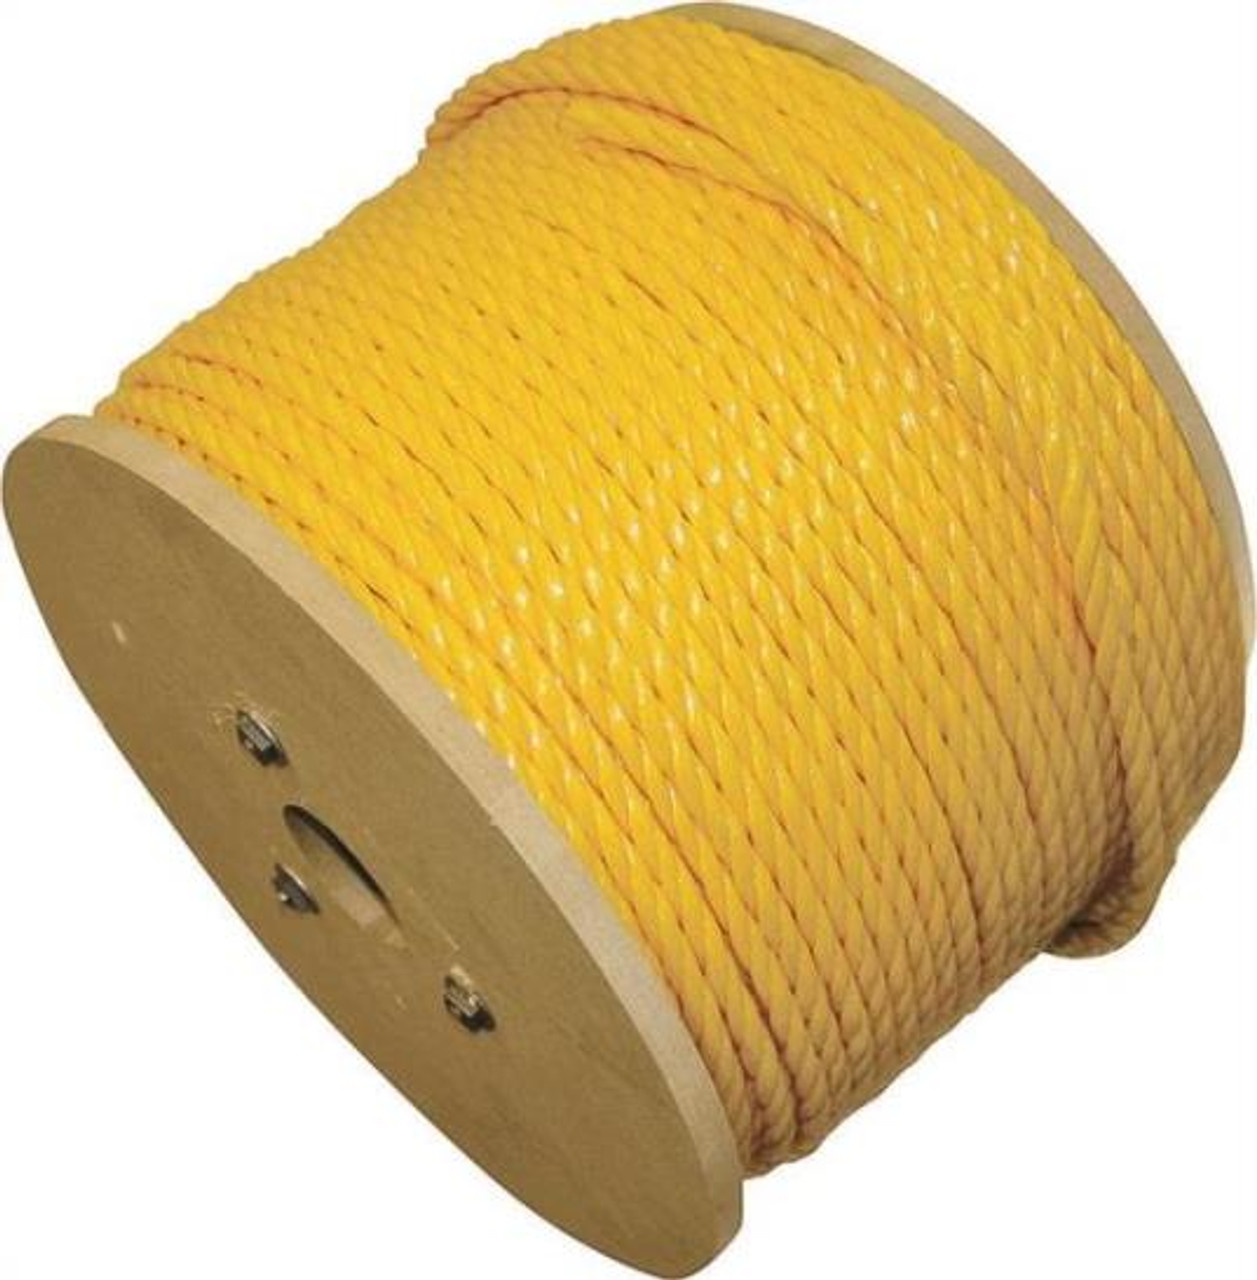 Rope- Polypropylene Twisted- 5/16 x 1' - Surry General Store